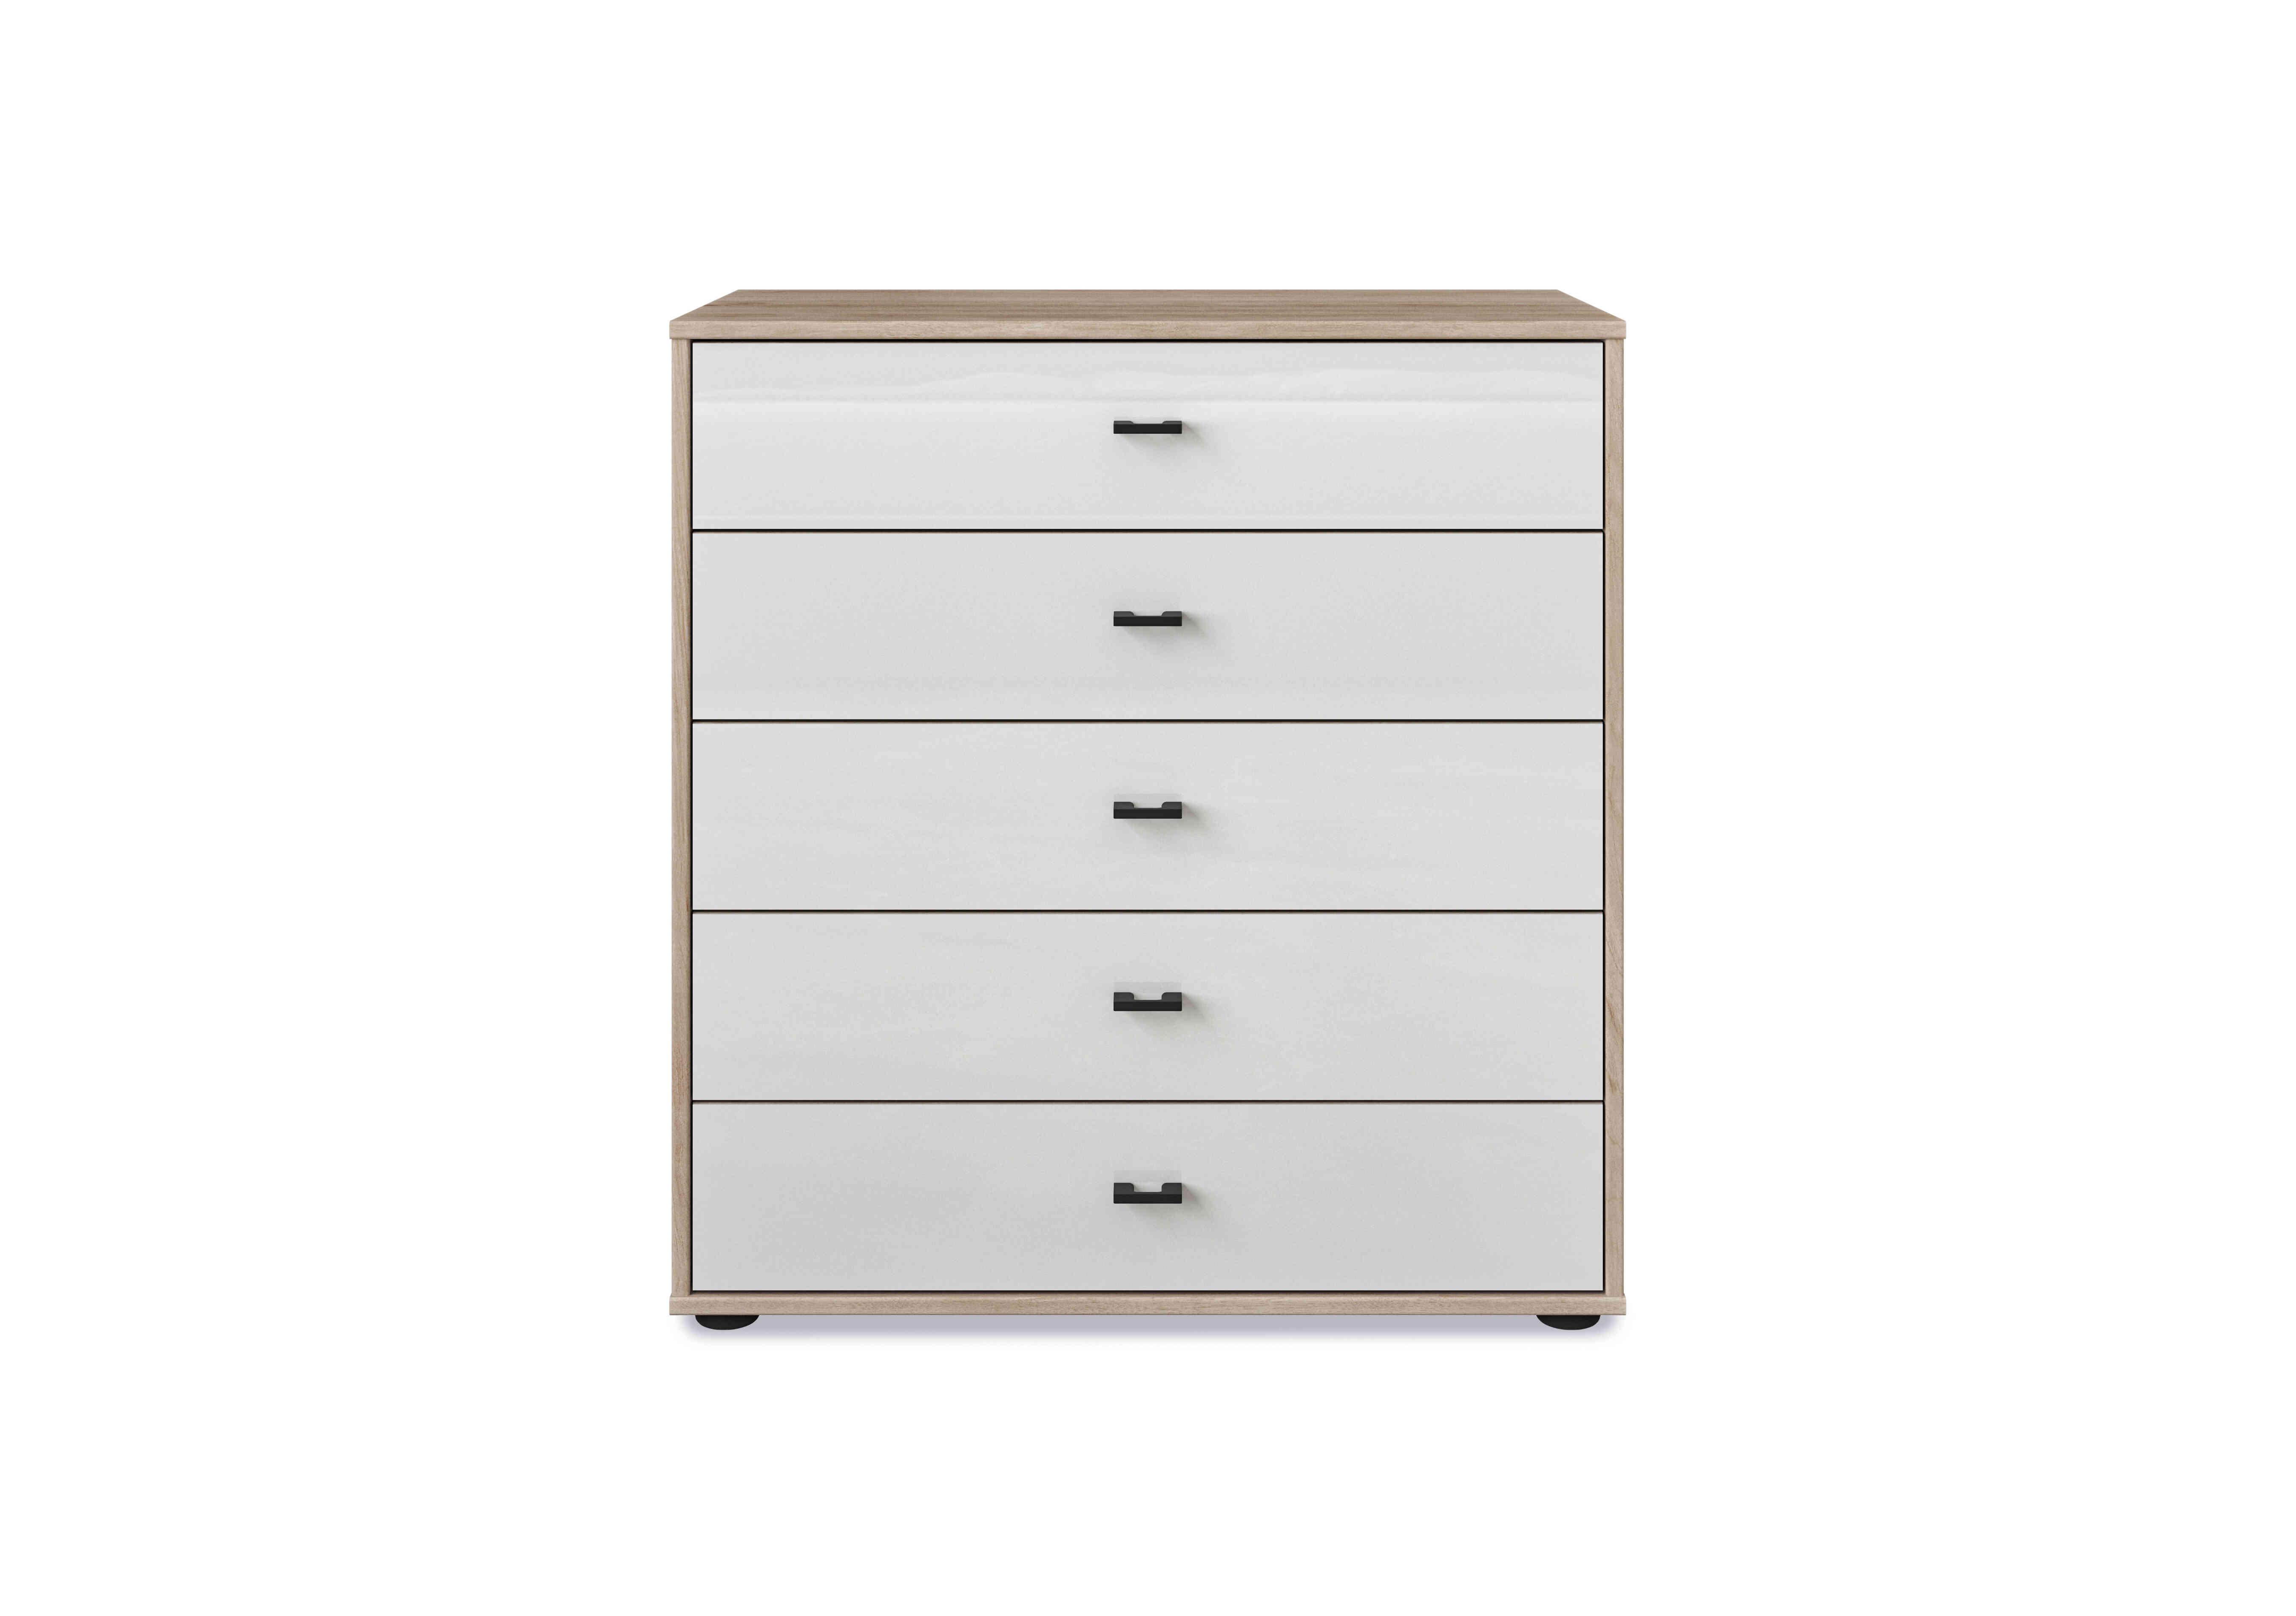 Dallas 80cm 5 Drawer Glass Chest in Holm Oak And White on Furniture Village